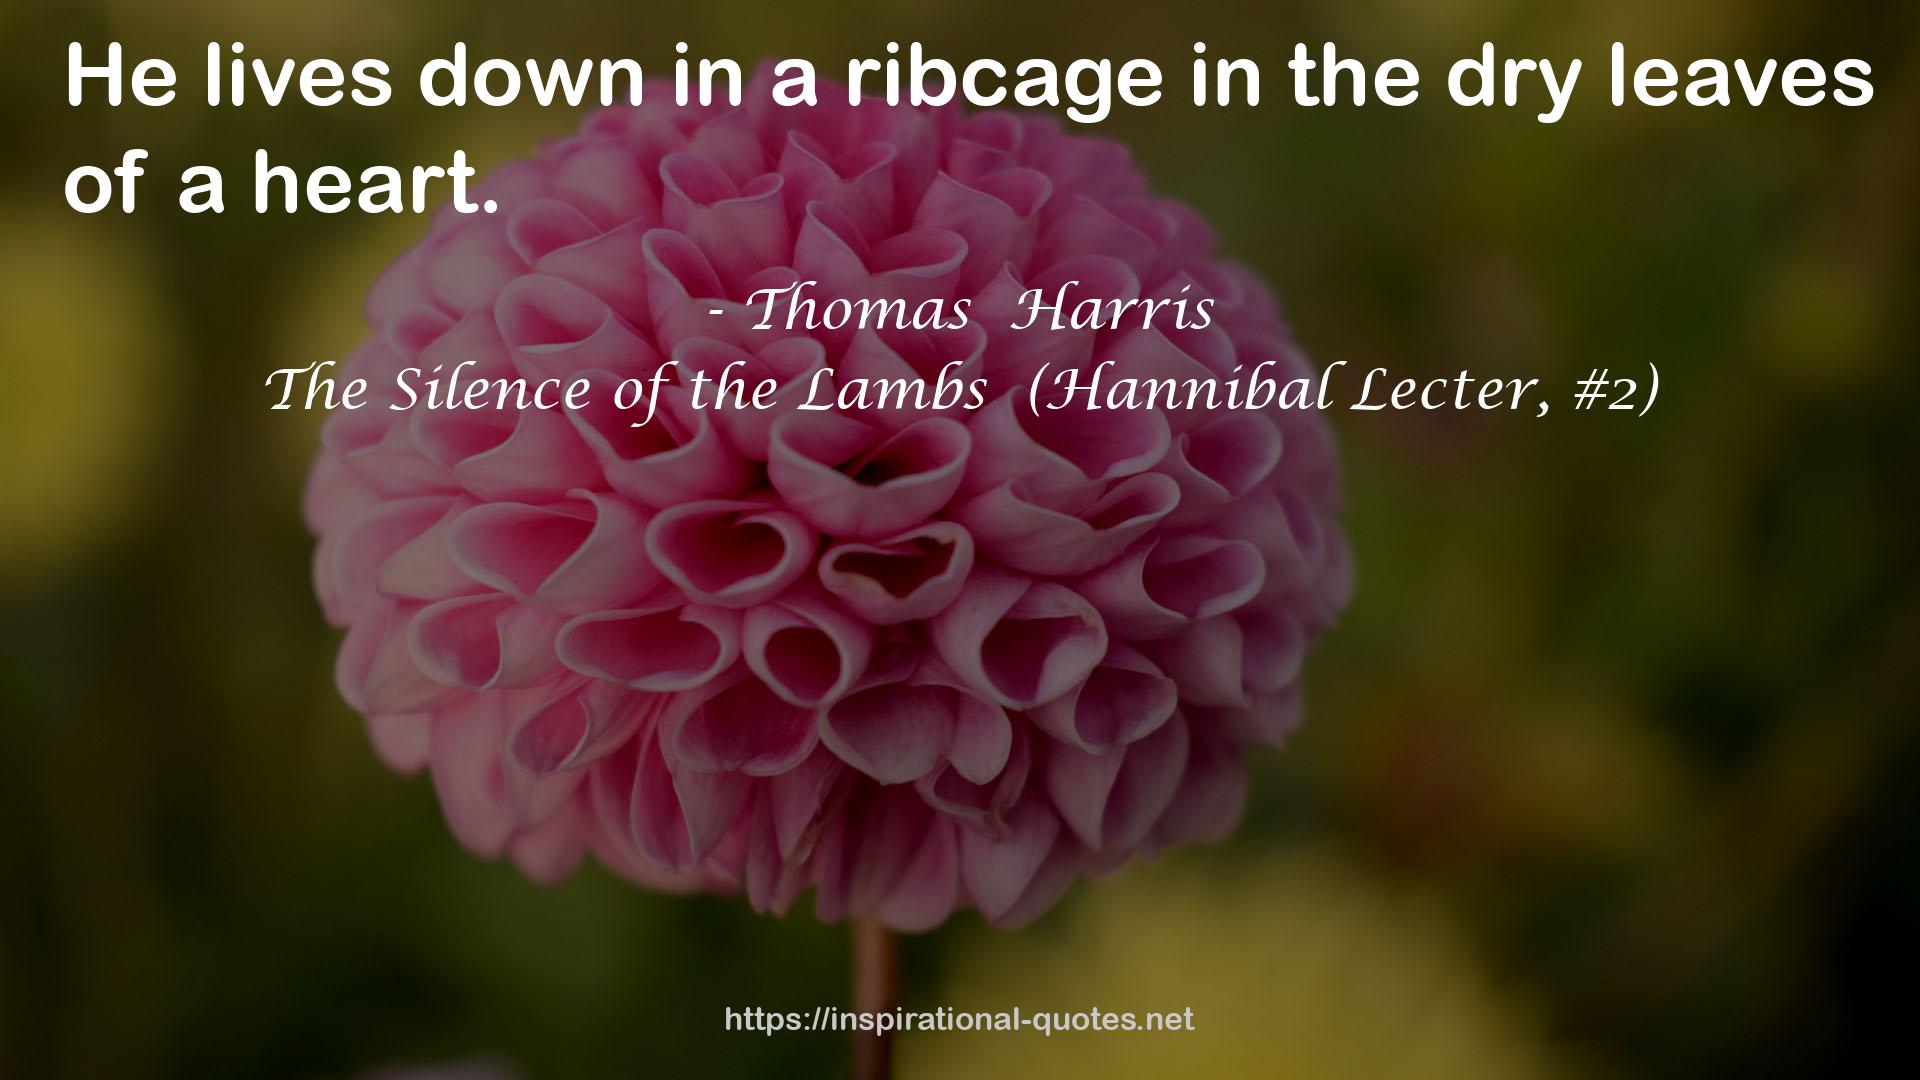 ribcage  QUOTES